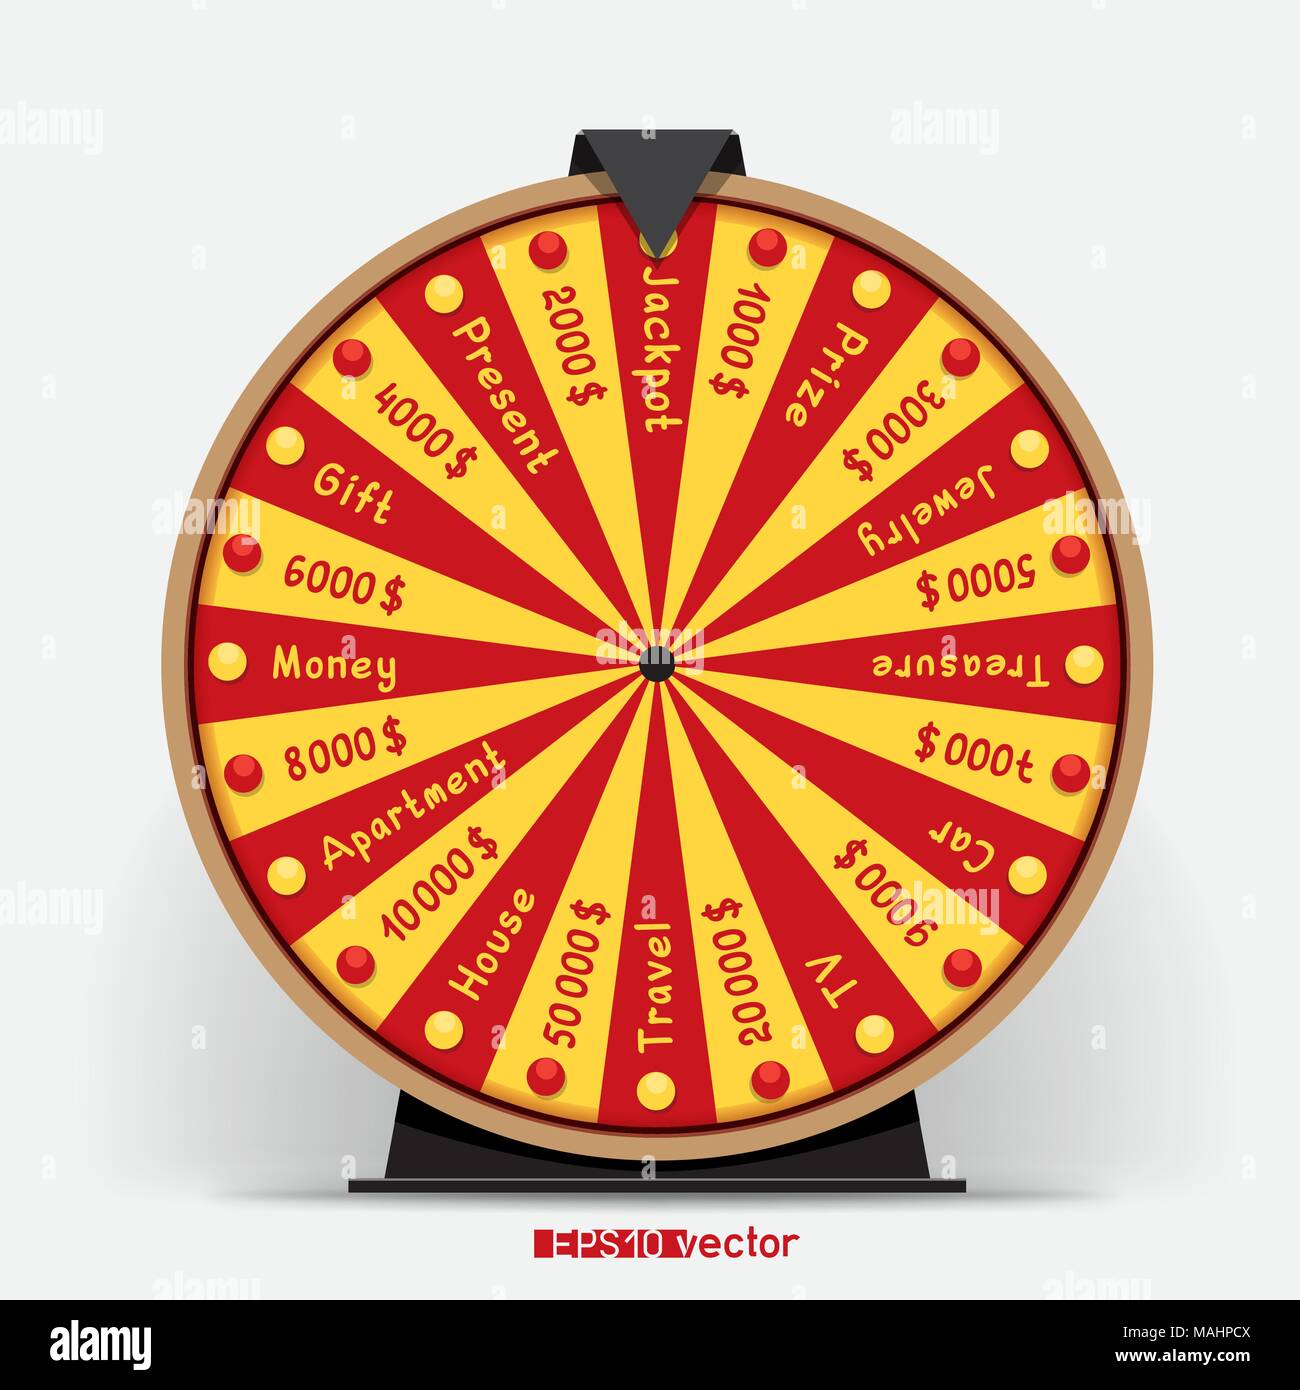 Twenty four segmentation fortune wheel lottery object. Gamble jackpot prize spin with shadow. Round drum casino money game Stock Vector